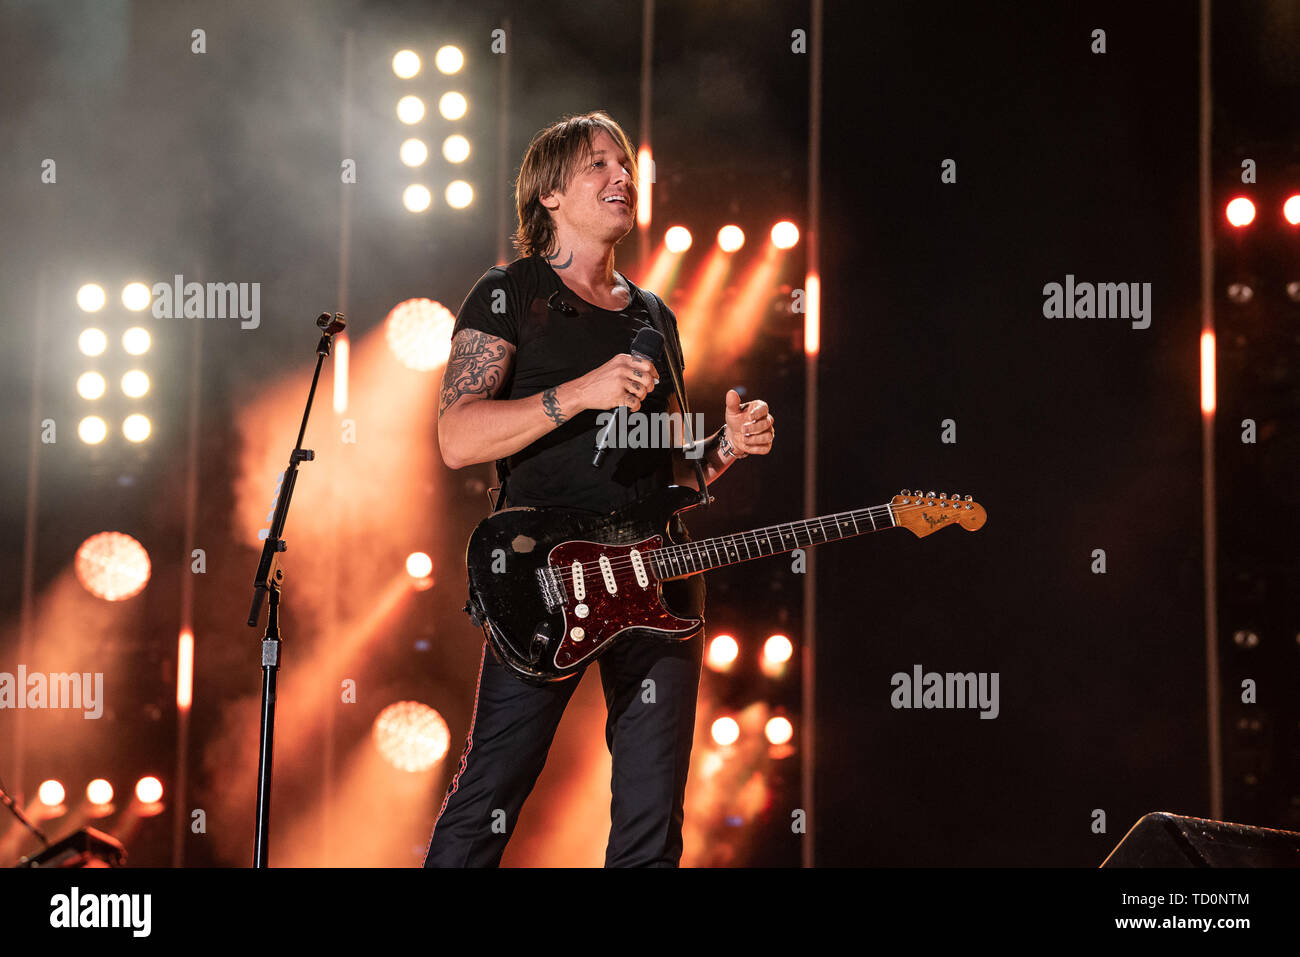 NASHVILLE, TENNESSEE - JUNE 09: Keith Urban performs on stage for day 4 of the 2019 CMA Music Festival on June 09, 2019 in Nashville, Tennessee. Photo: Andrew Wendowski for imageSPACE/MediaPunch Stock Photo